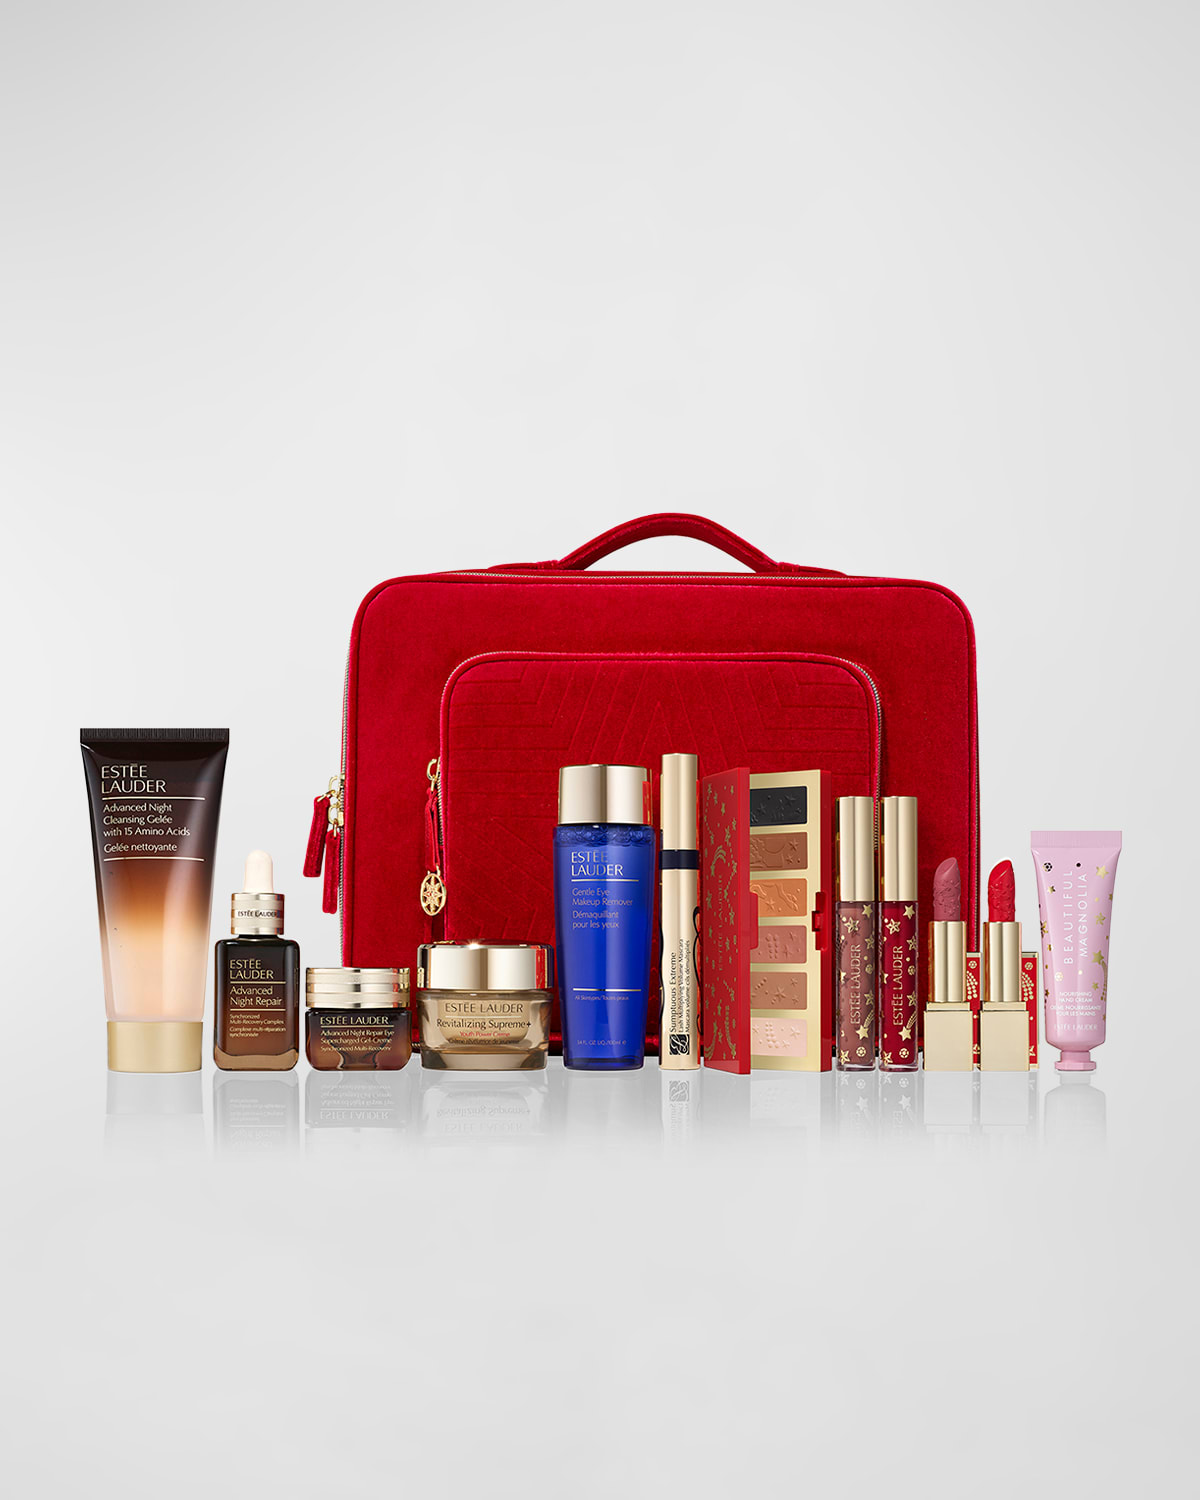 Estée Lauder 11 Full-size Favorites & More Gift Set - $85 With Any Estee Lauder Purchase - A $615 Value In Multi